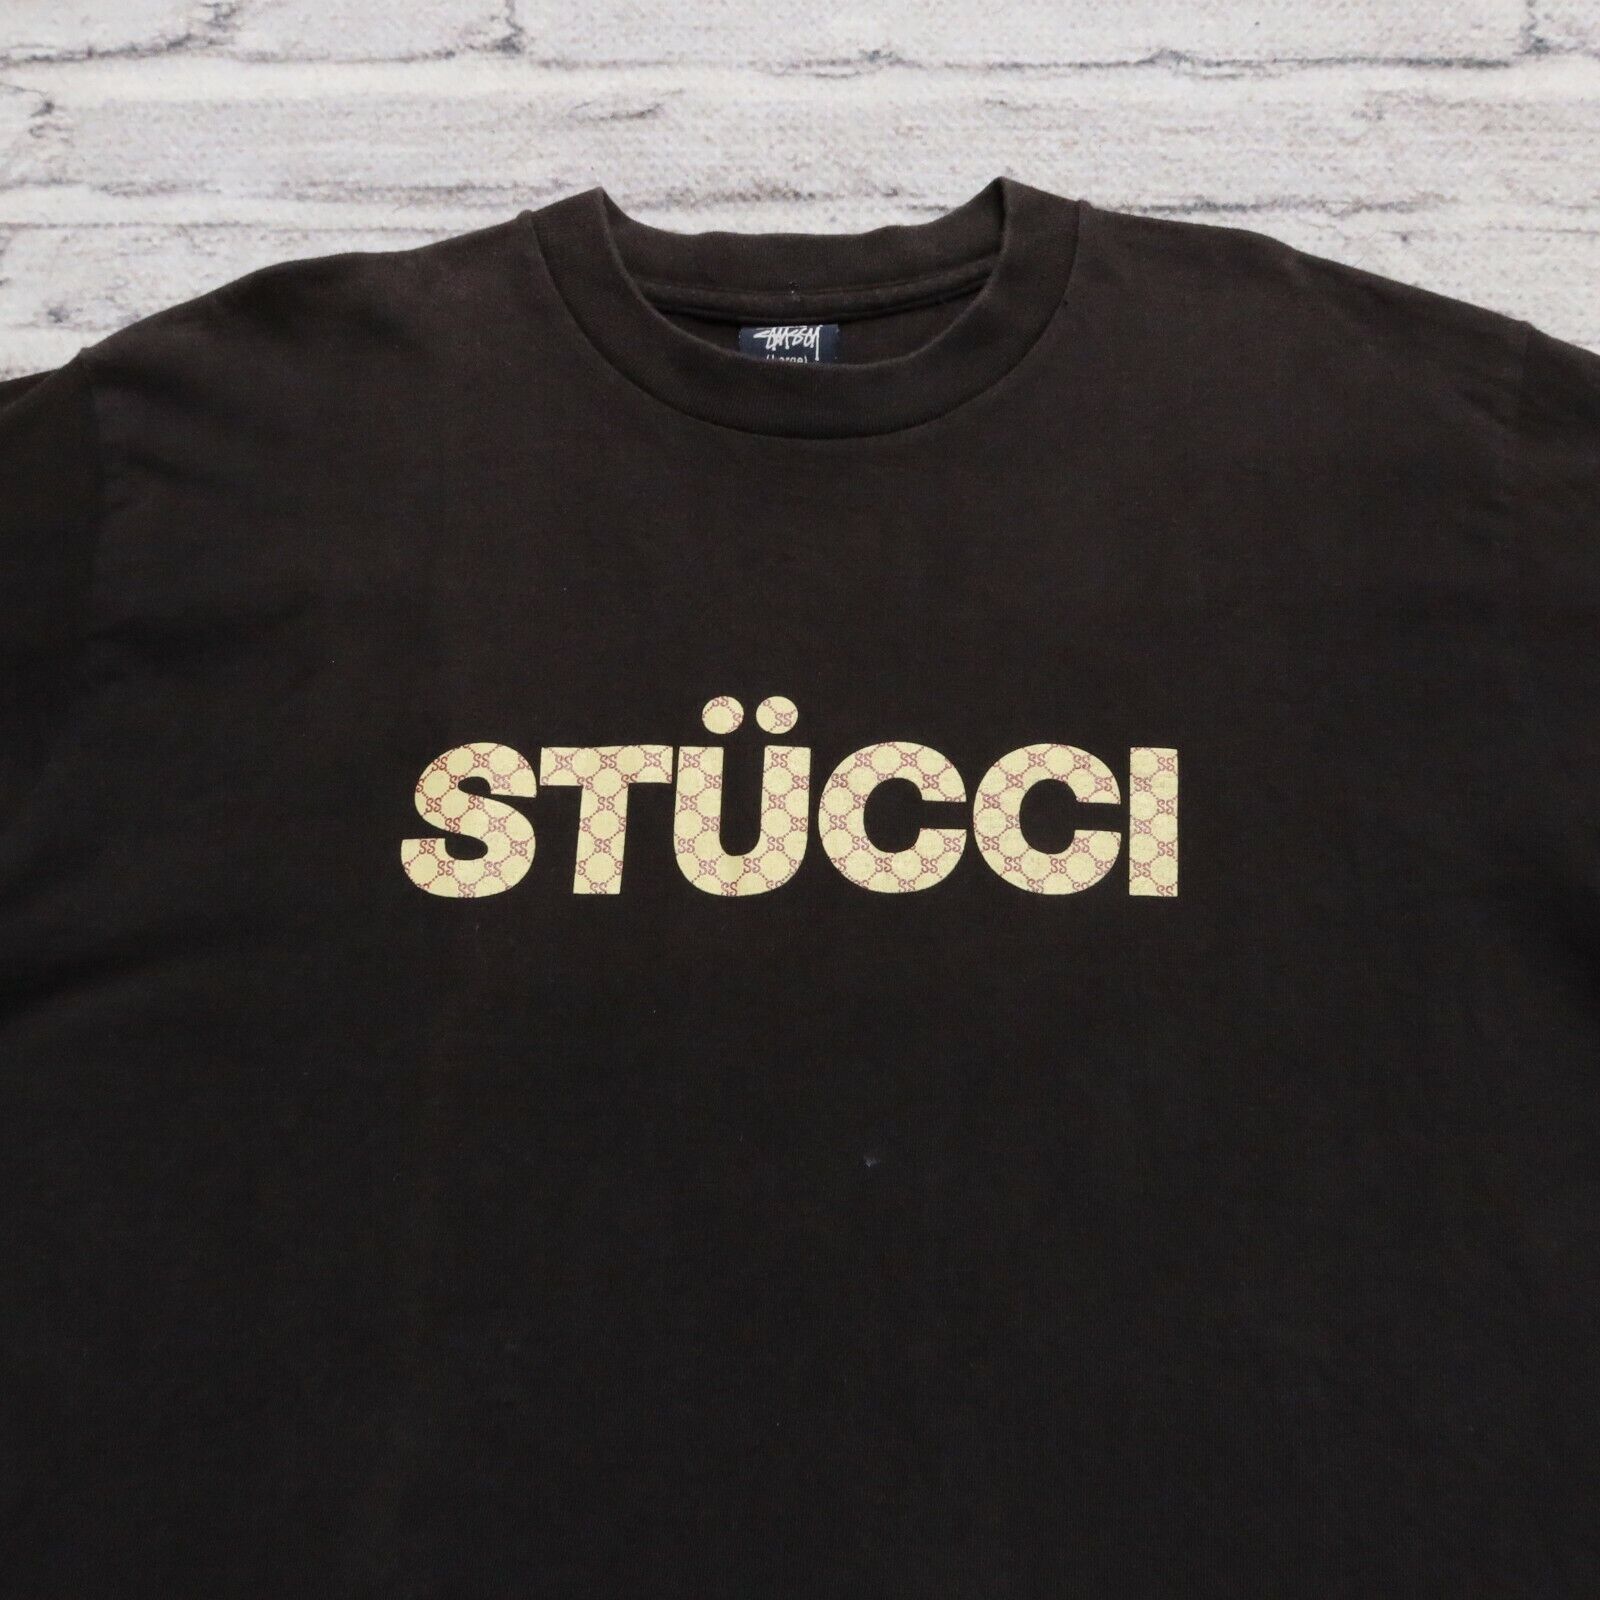 Vintage Rare Stussy Stucci Tshirt Hip Hop 90s Single Stitch Made in 